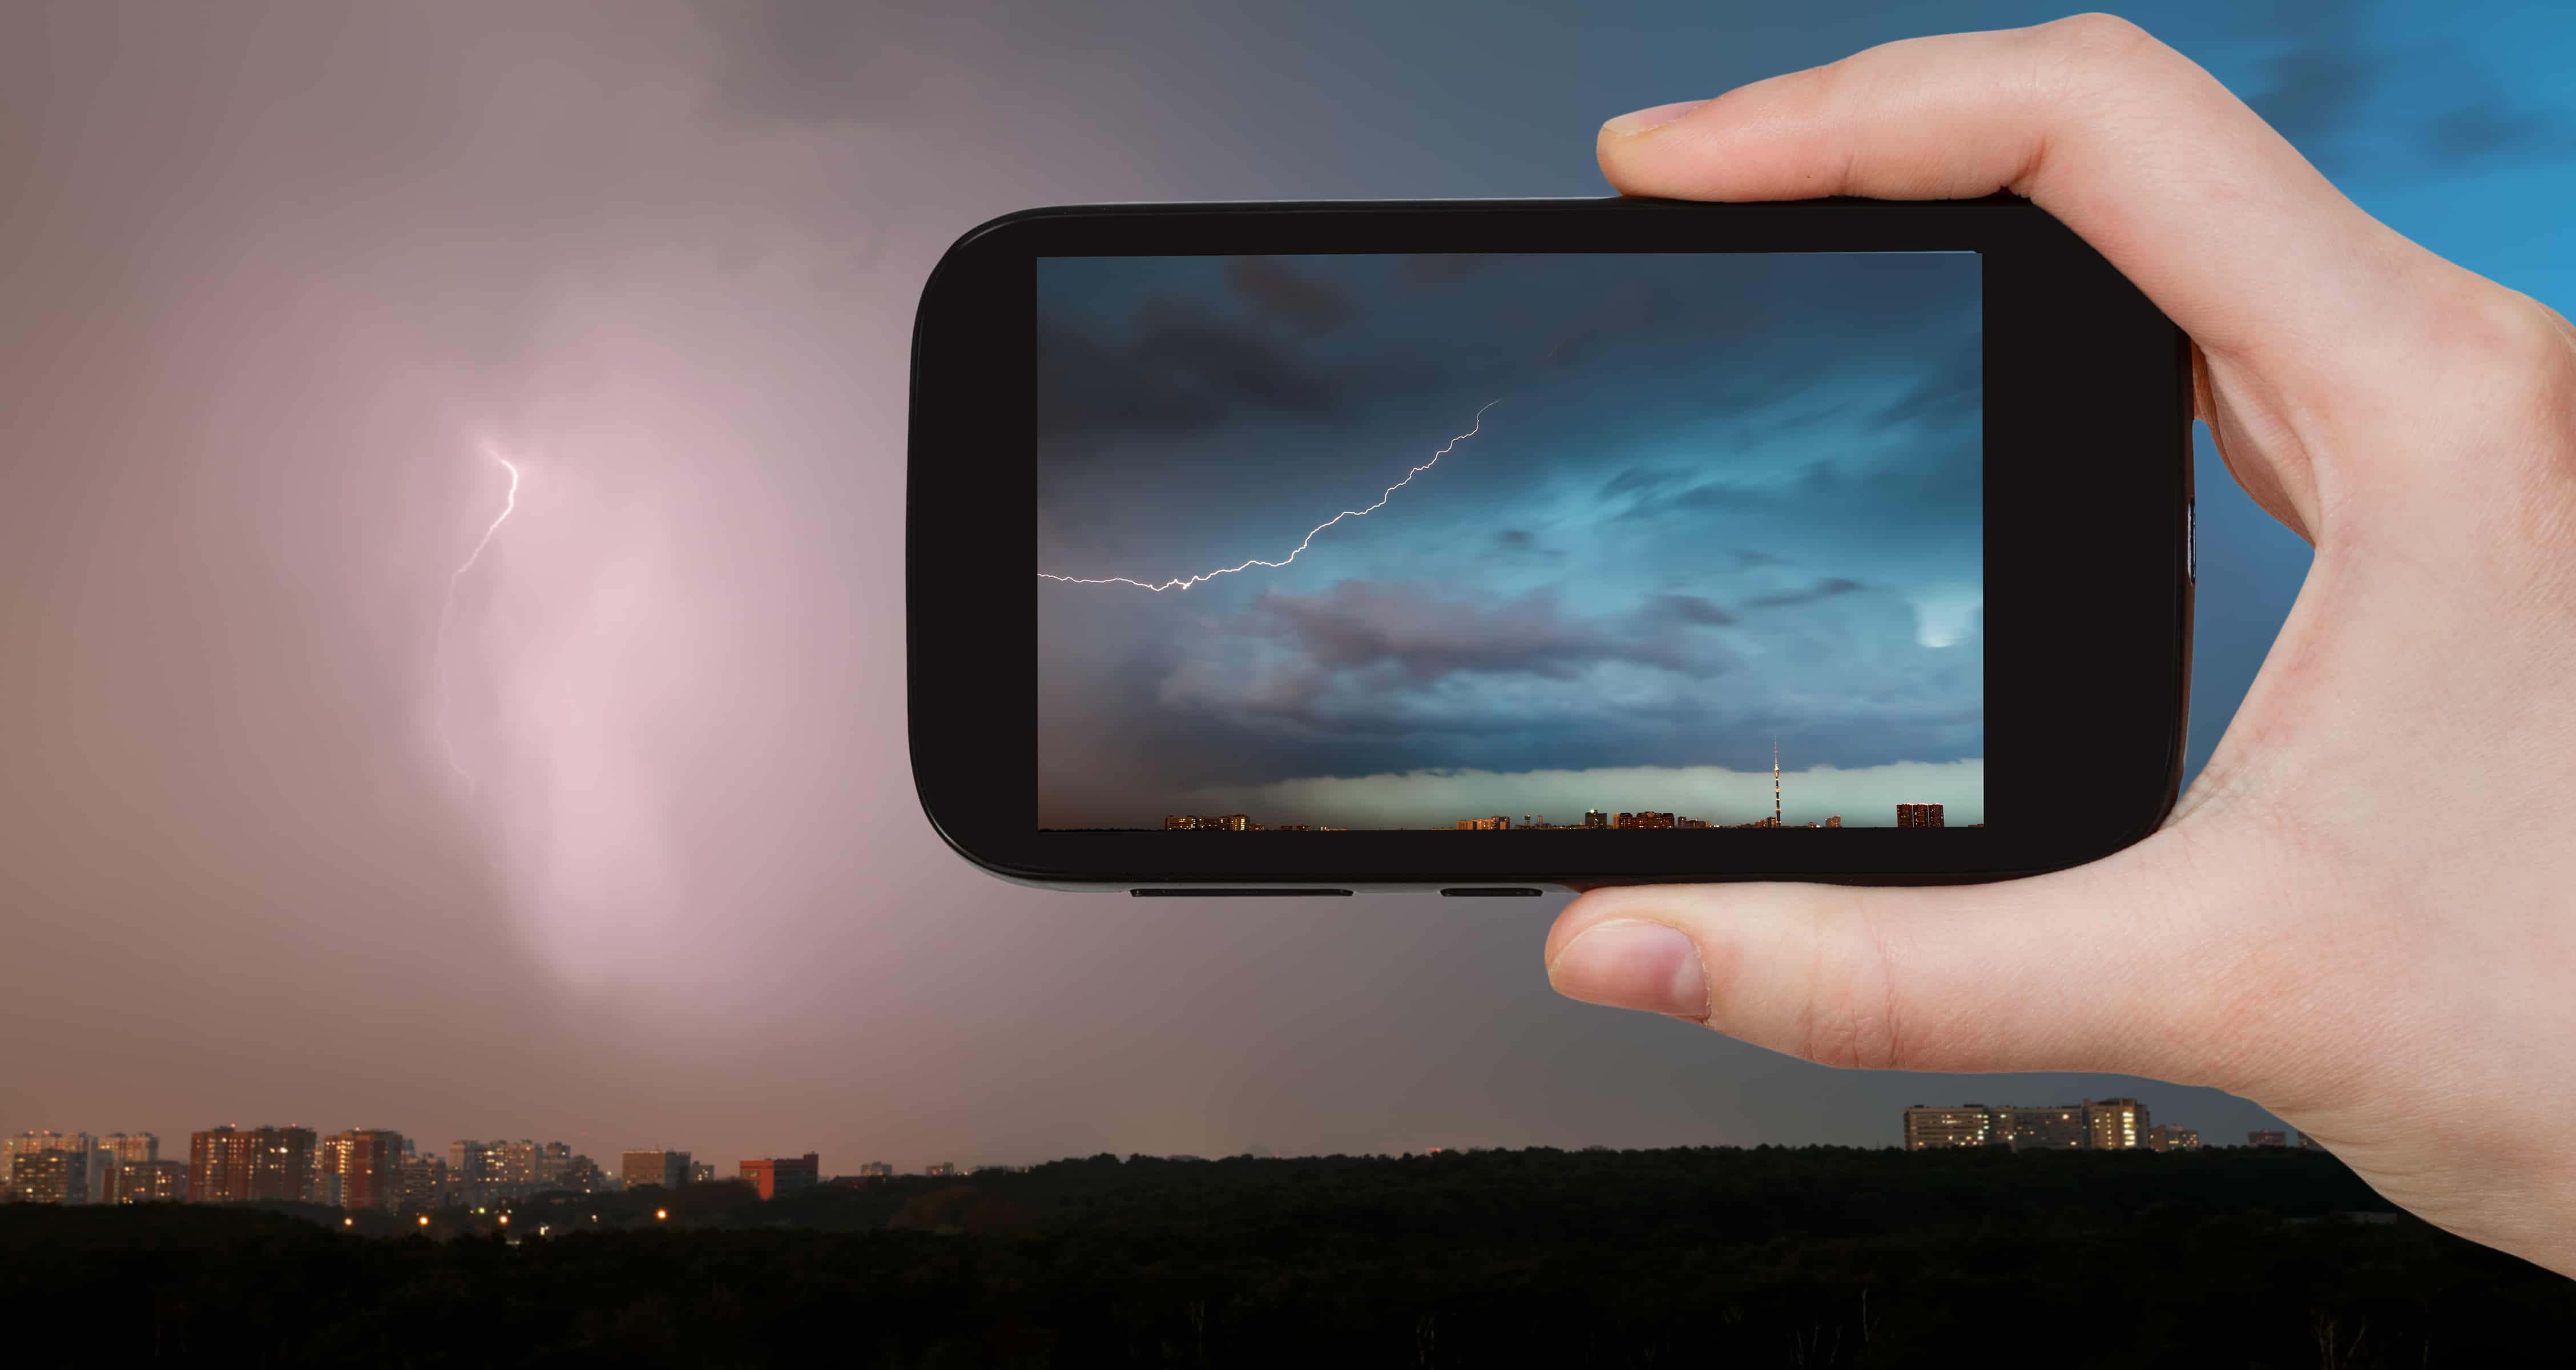 Smartphone taking a photo of a thunderstorm